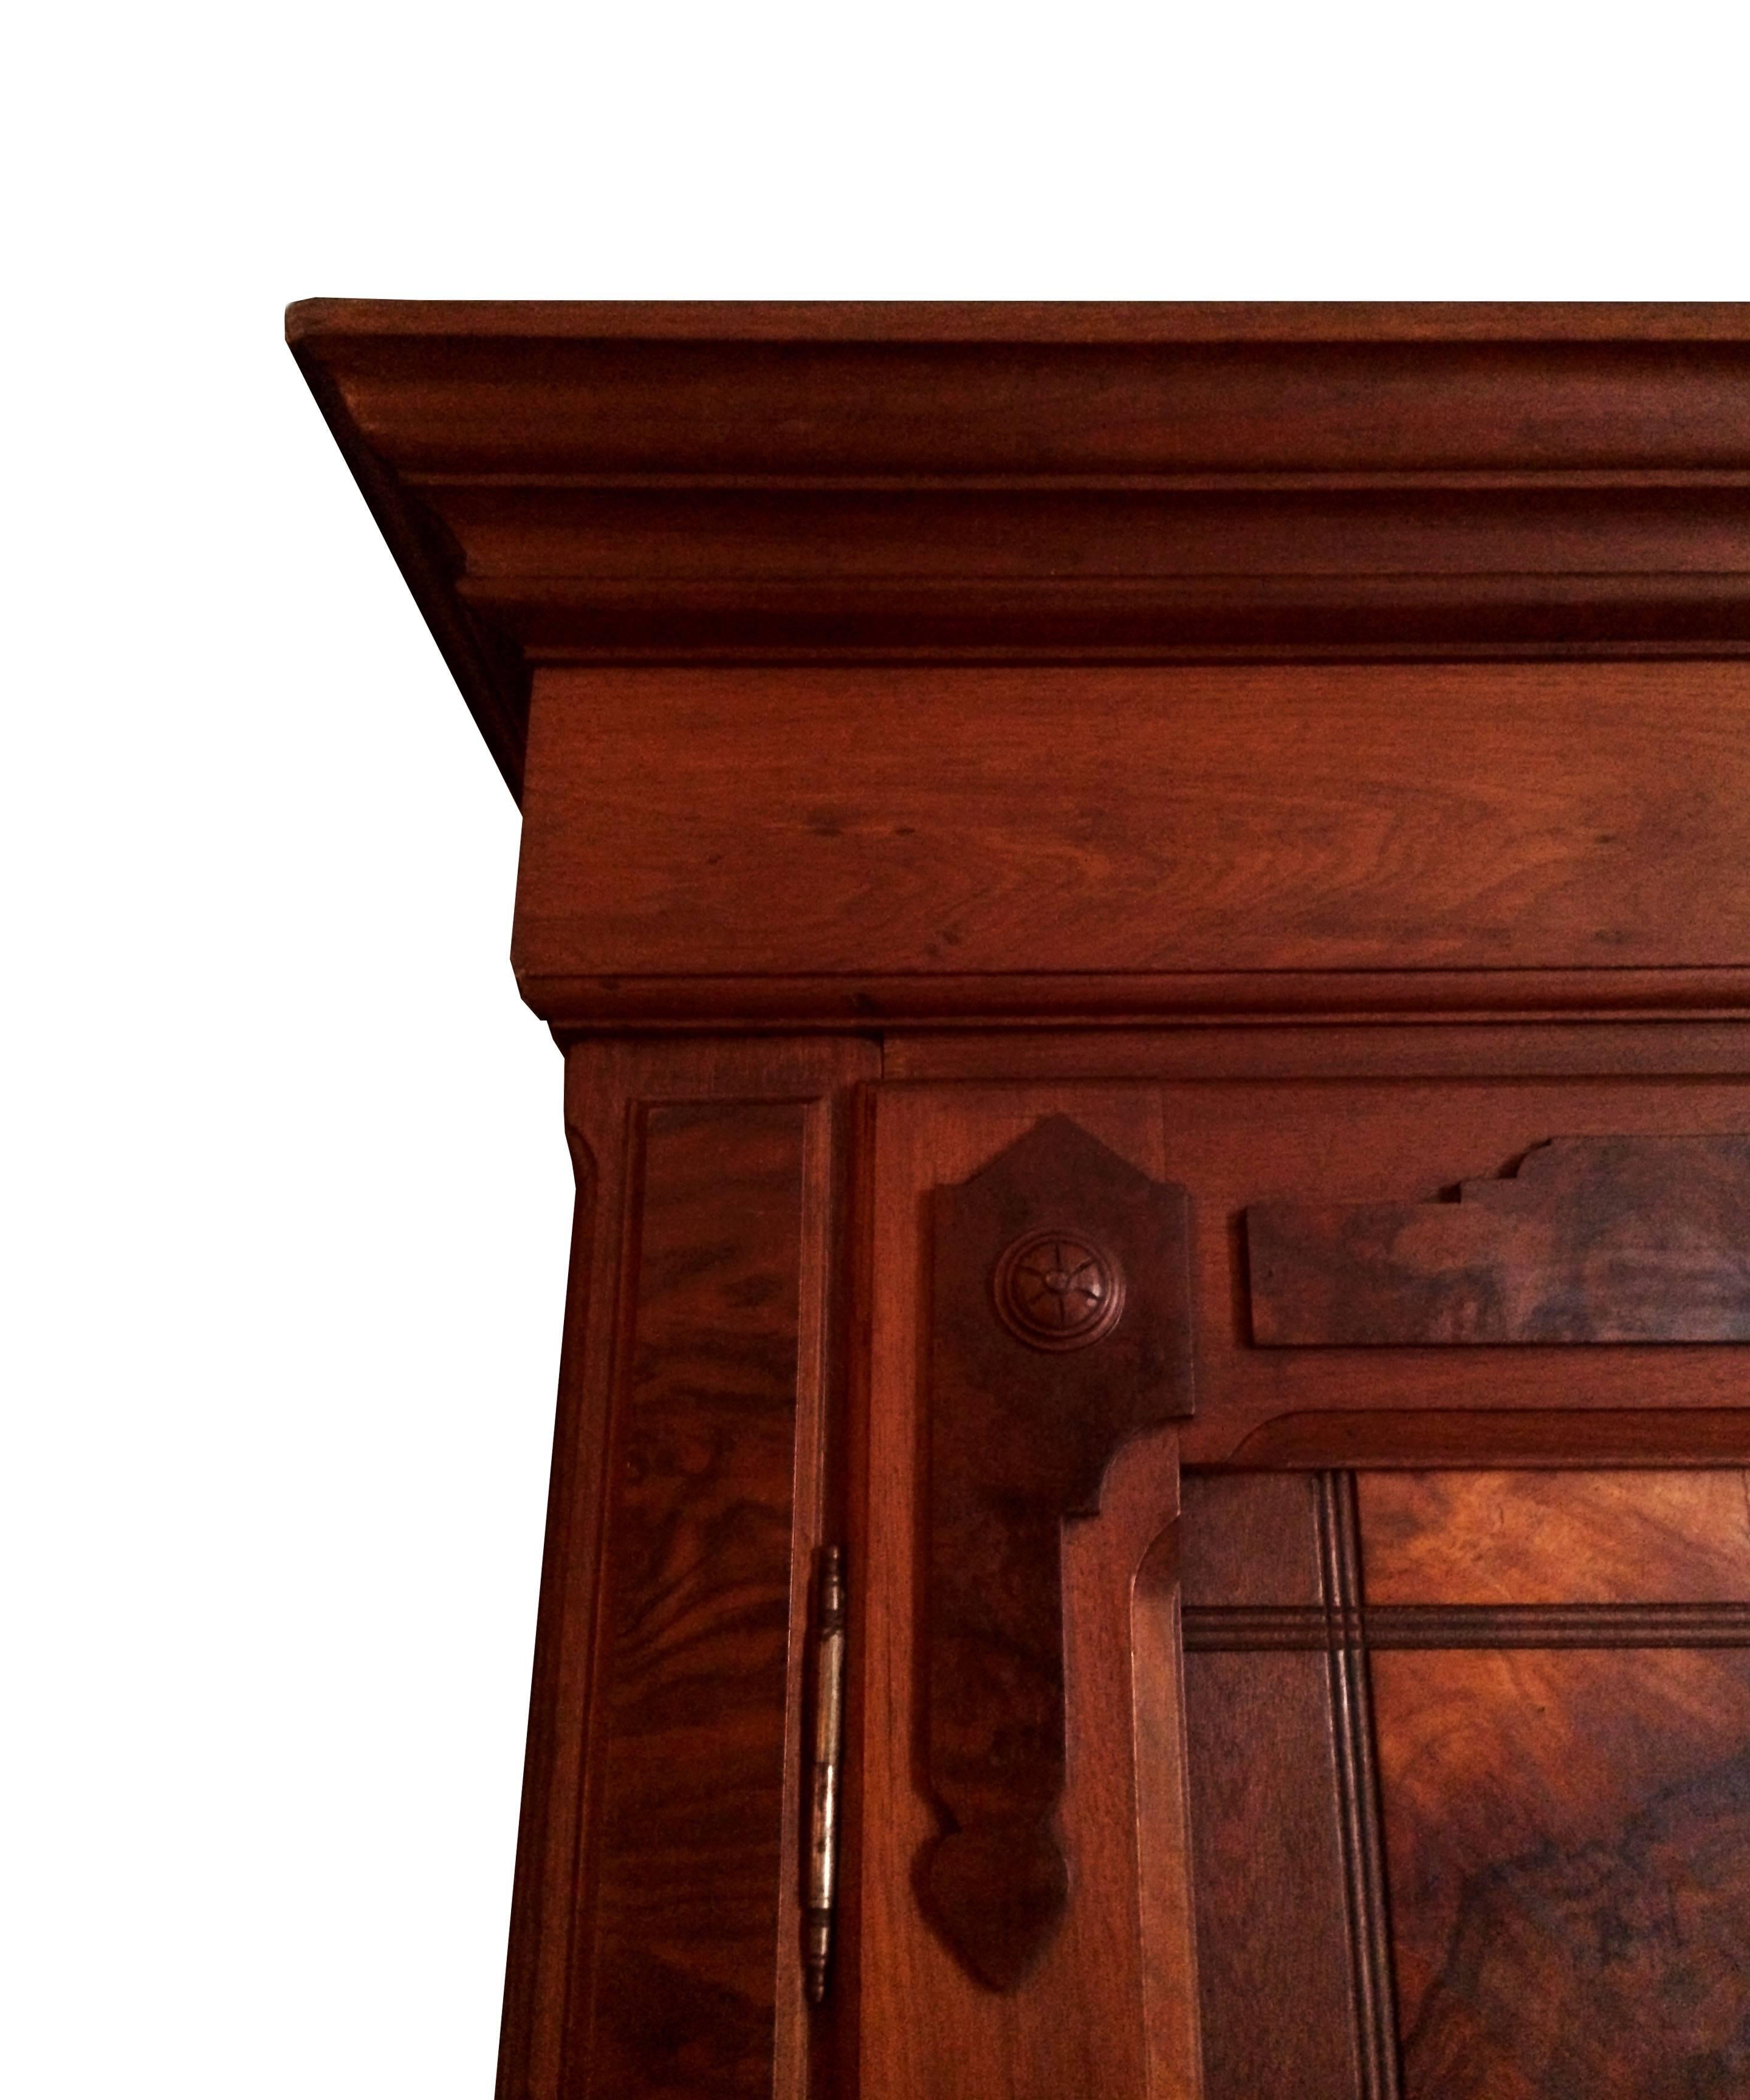 A tall visually astounding walnut and burl veneer wardrobe. The ample ogee cornice rests above powerfully figured burl walnut veneer doors. The doors open to reveal a hate shelf above a chrome-plated hanging rack. The armoire rests on a base